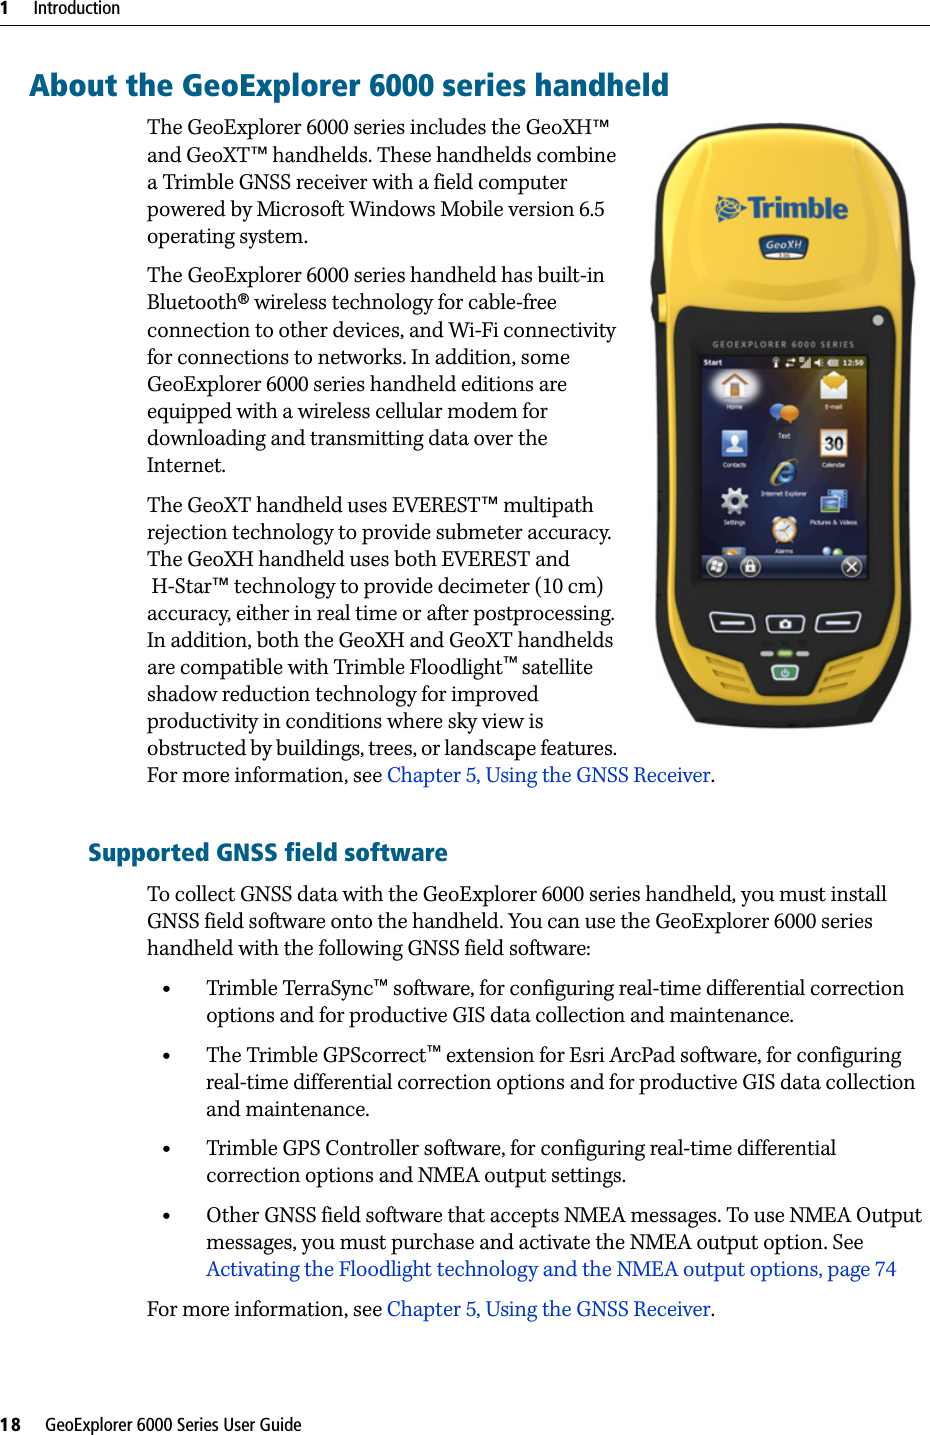 1     Introduction18     GeoExplorer 6000 Series User GuideAbout the GeoExplorer 6000 series handheldThe GeoExplorer 6000 series includes the GeoXH™  and GeoXT™ handhelds. These handhelds combine a Trimble GNSS receiver with a field computer powered by Microsoft Windows Mobile version 6.5 operating system. The GeoExplorer 6000 series handheld has built-in Bluetooth® wireless technology for cable-free connection to other devices, and Wi-Fi connectivity for connections to networks. In addition, some GeoExplorer 6000 series handheld editions are equipped with a wireless cellular modem for downloading and transmitting data over the Internet.The GeoXT handheld uses EVEREST™ multipath rejection technology to provide submeter accuracy. The GeoXH handheld uses both EVEREST and H-Star™ technology to provide decimeter (10 cm) accuracy, either in real time or after postprocessing. In addition, both the GeoXH and GeoXT handhelds are compatible with Trimble Floodlight™ satellite shadow reduction technology for improved productivity in conditions where sky view is obstructed by buildings, trees, or landscape features. For more information, see Chapter 5, Using the GNSS Receiver.Supported GNSS field softwareTo collect GNSS data with the GeoExplorer 6000 series handheld, you must install GNSS field software onto the handheld. You can use the GeoExplorer 6000 series handheld with the following GNSS field software:•Trimble TerraSync™ software, for configuring real-time differential correction options and for productive GIS data collection and maintenance.•The Trimble GPScorrect™ extension for Esri ArcPad software, for configuring real-time differential correction options and for productive GIS data collection and maintenance.•Trimble GPS Controller software, for configuring real-time differential correction options and NMEA output settings.•Other GNSS field software that accepts NMEA messages. To use NMEA Output messages, you must purchase and activate the NMEA output option. See Activating the Floodlight technology and the NMEA output options, page 74For more information, see Chapter 5, Using the GNSS Receiver.